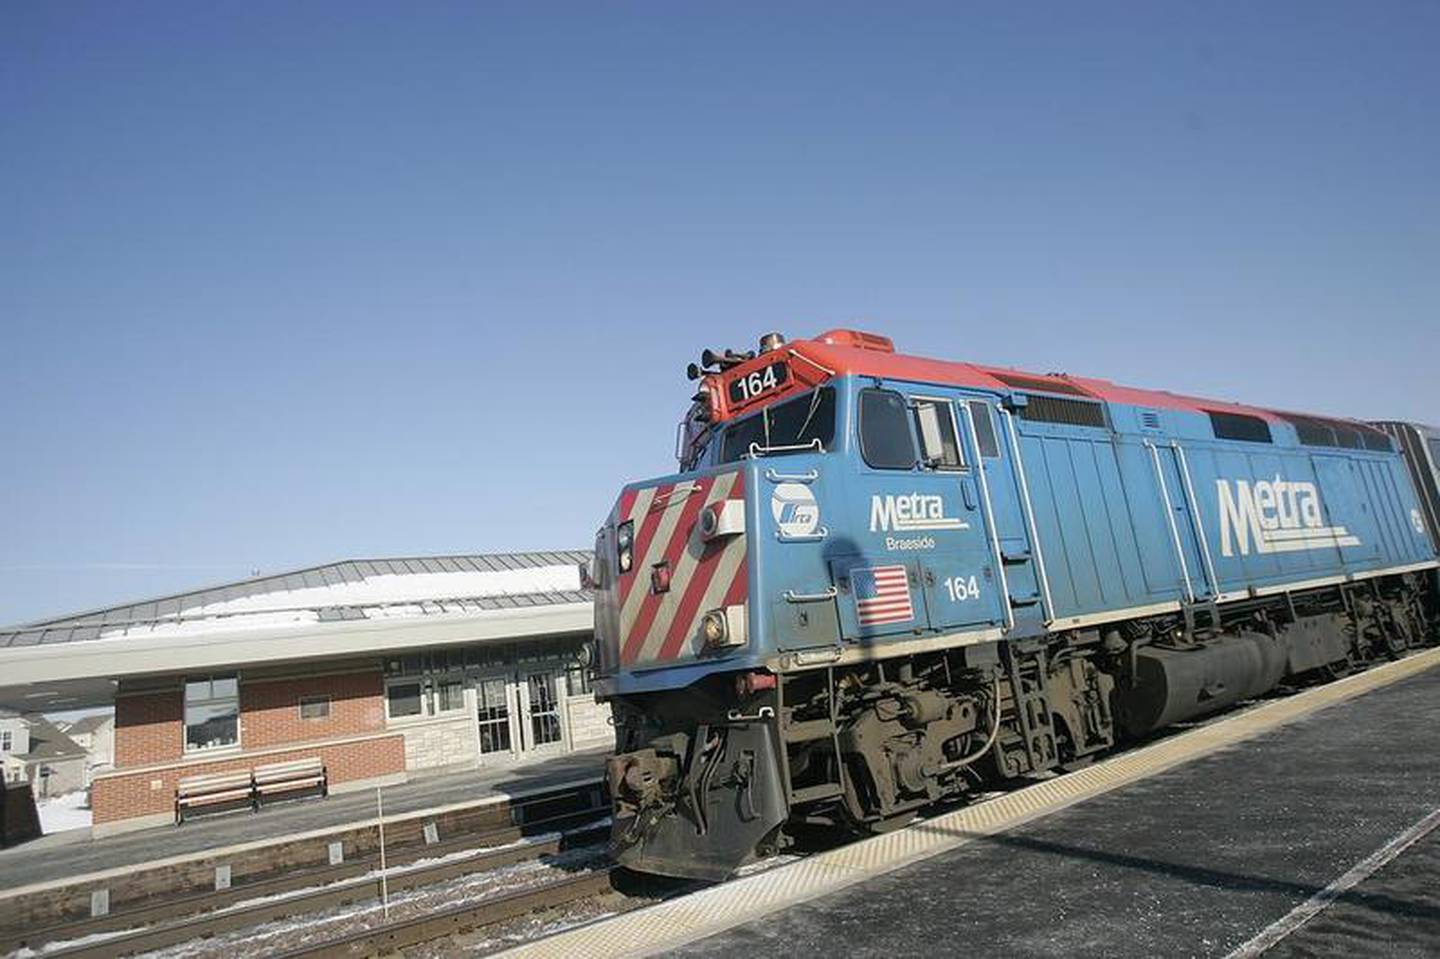 Metra plans to offer early departure schedules for most of its lines through Labor Day, including the Union Pacific Northwest line that runs through McHenry County.